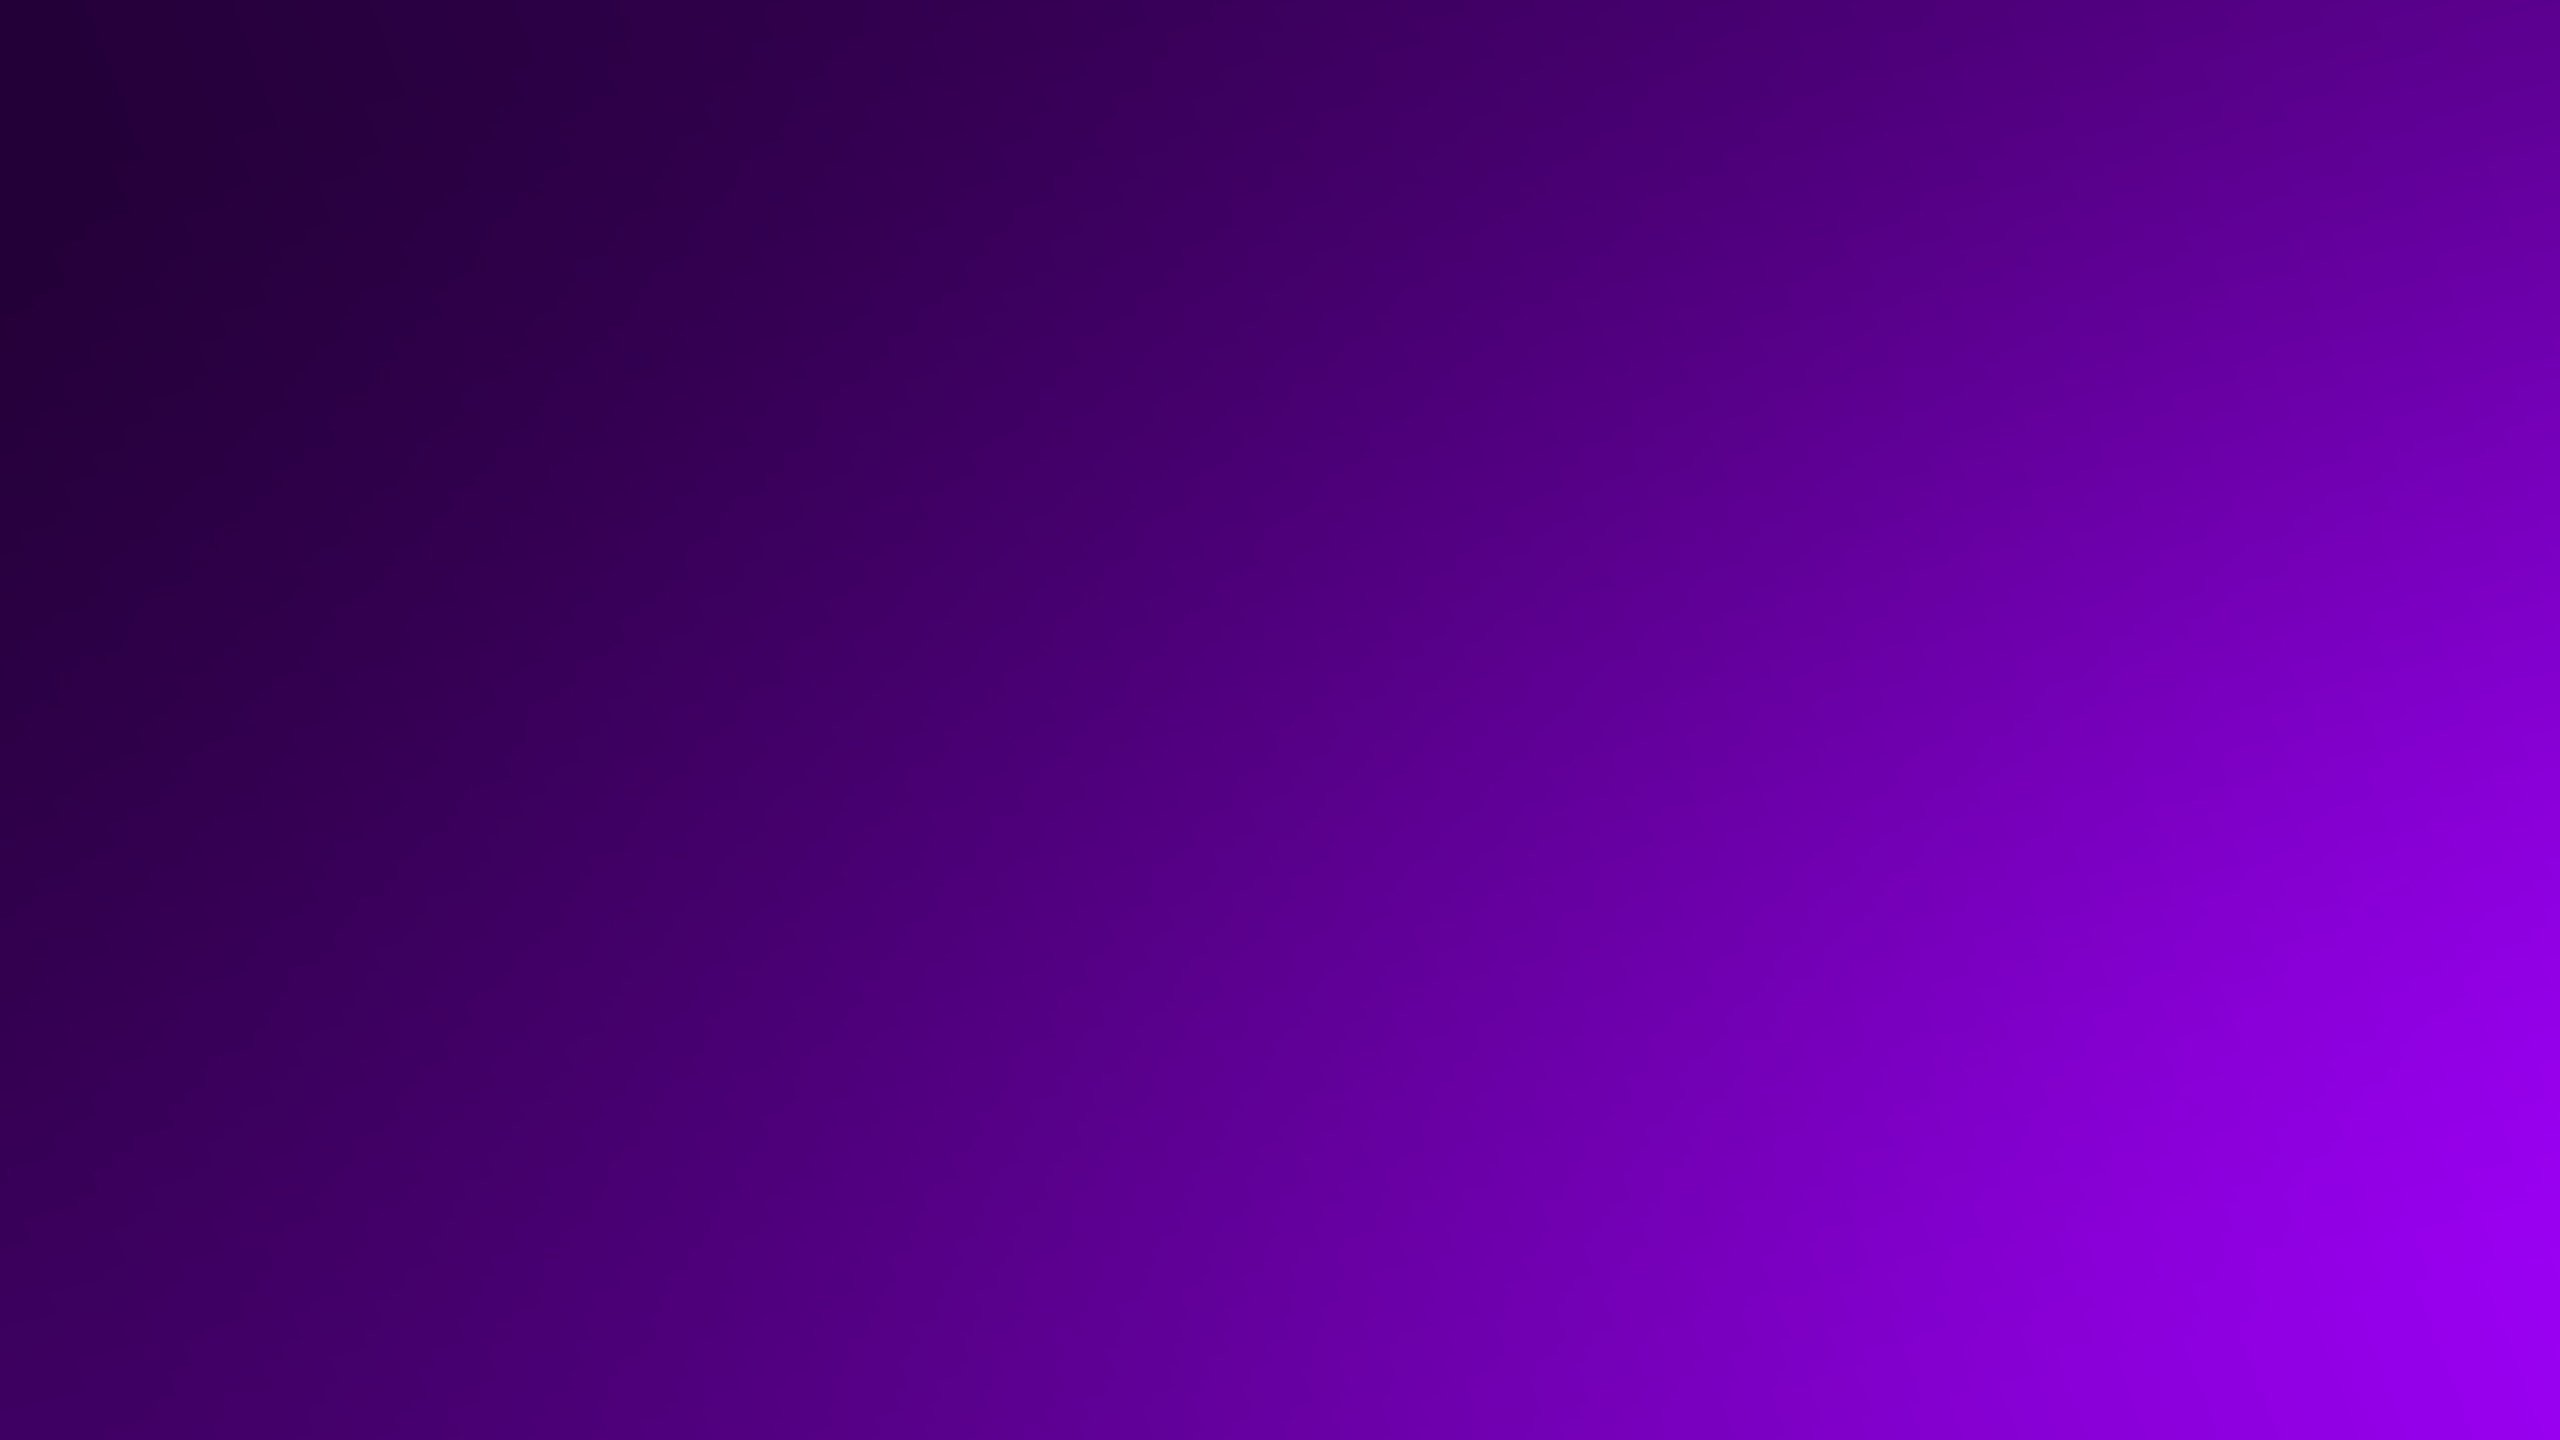 2560x1440 Solid Purple Background; solid light blue background